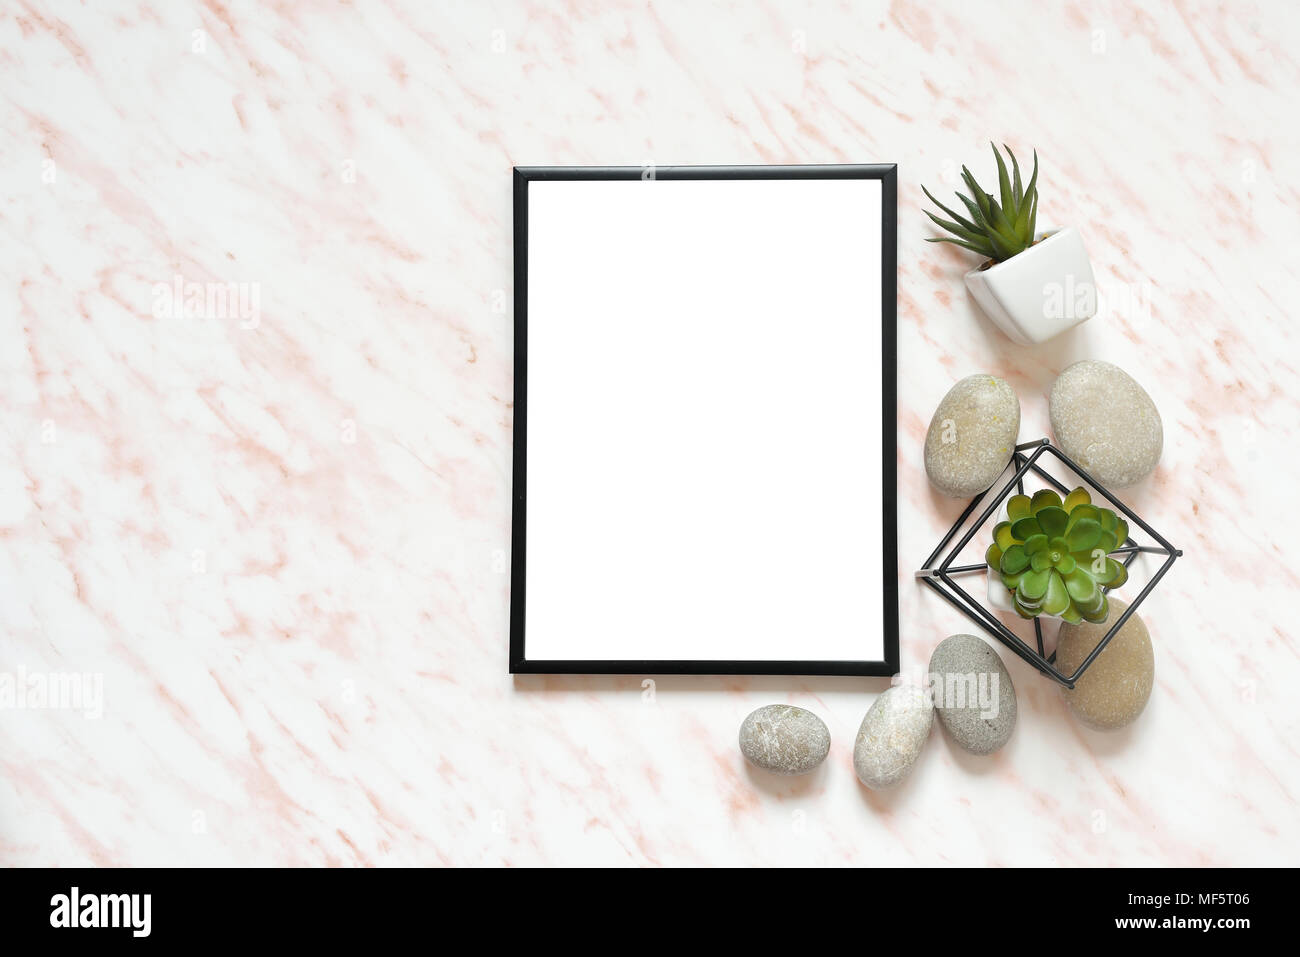 Flat lay marble desk with white empty frame for text, stones and succulents background Stock Photo